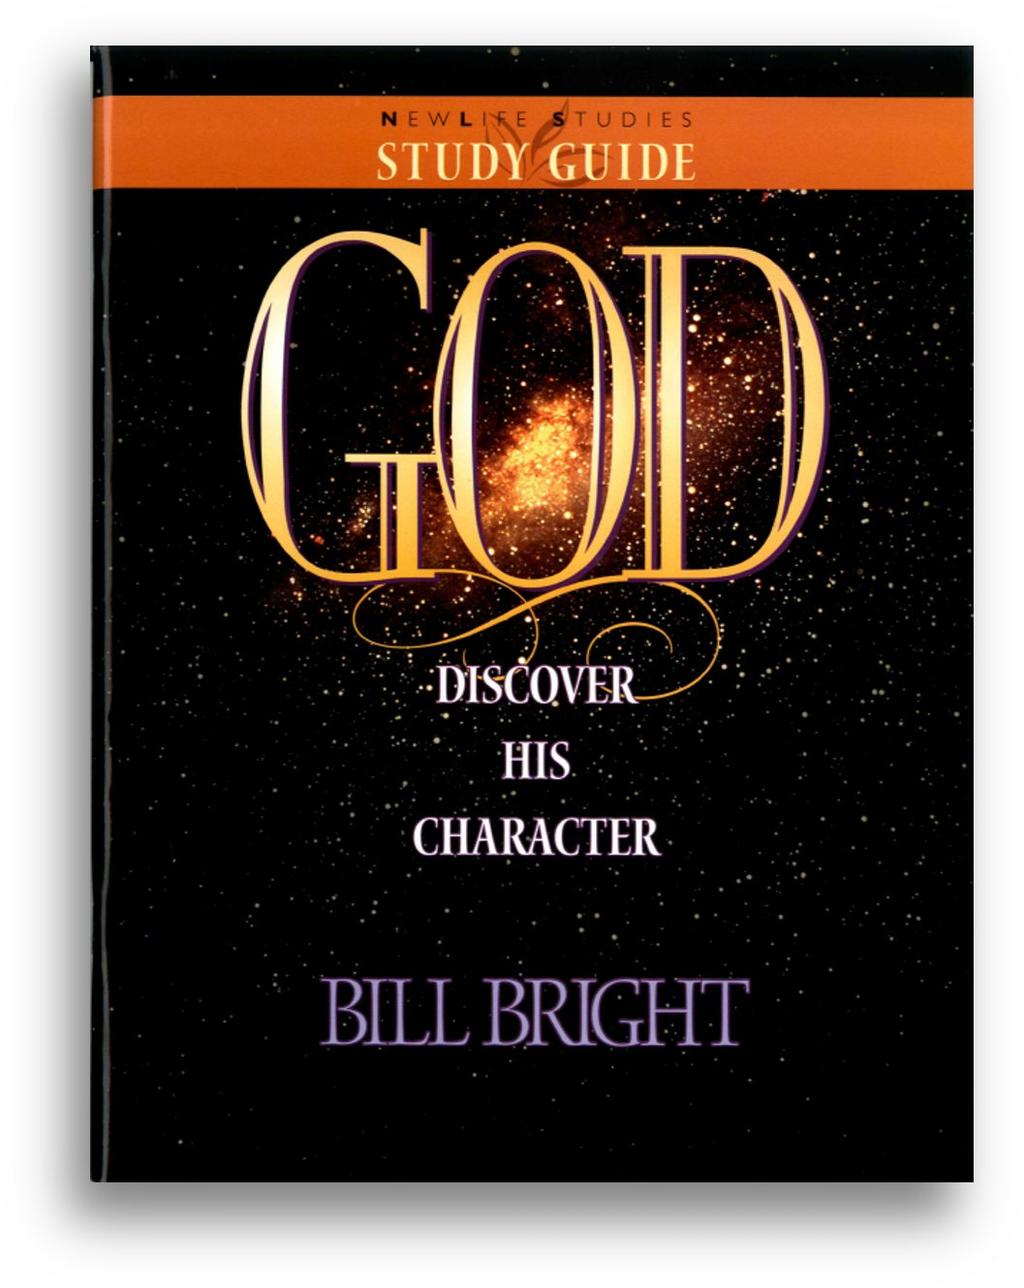 If you would like to download the entire GOD: Discover His Character Bible Study (which covers all the